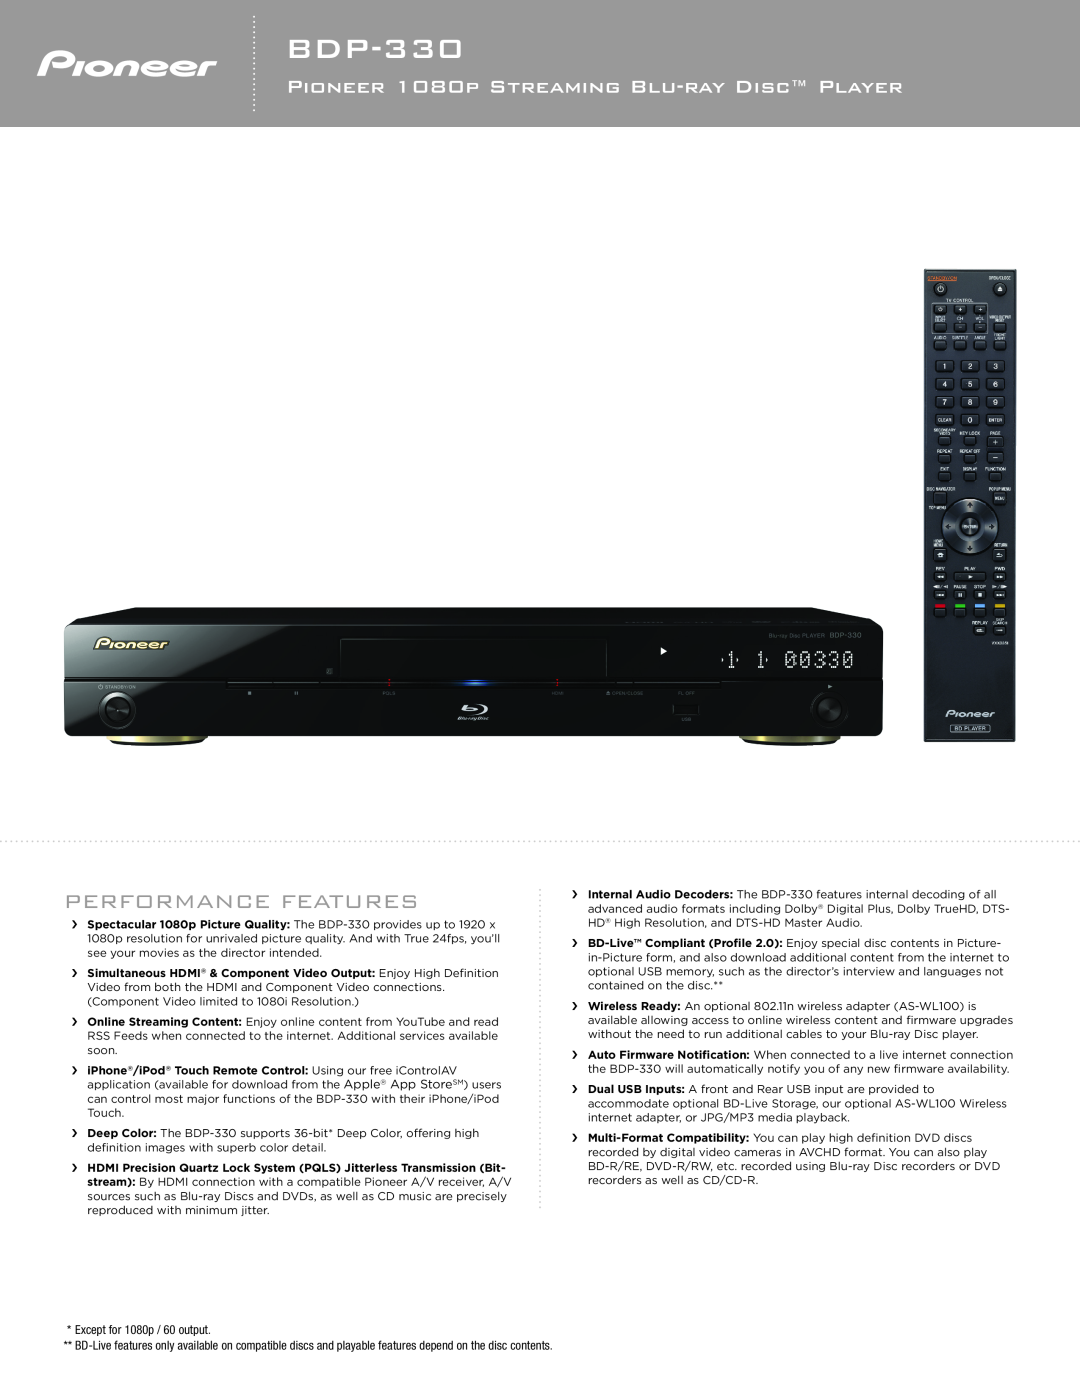 Pioneer BDP-330 manual Performance Features, PIONEER 1080P STREAMING BLU-RAY DISC PLAYER 